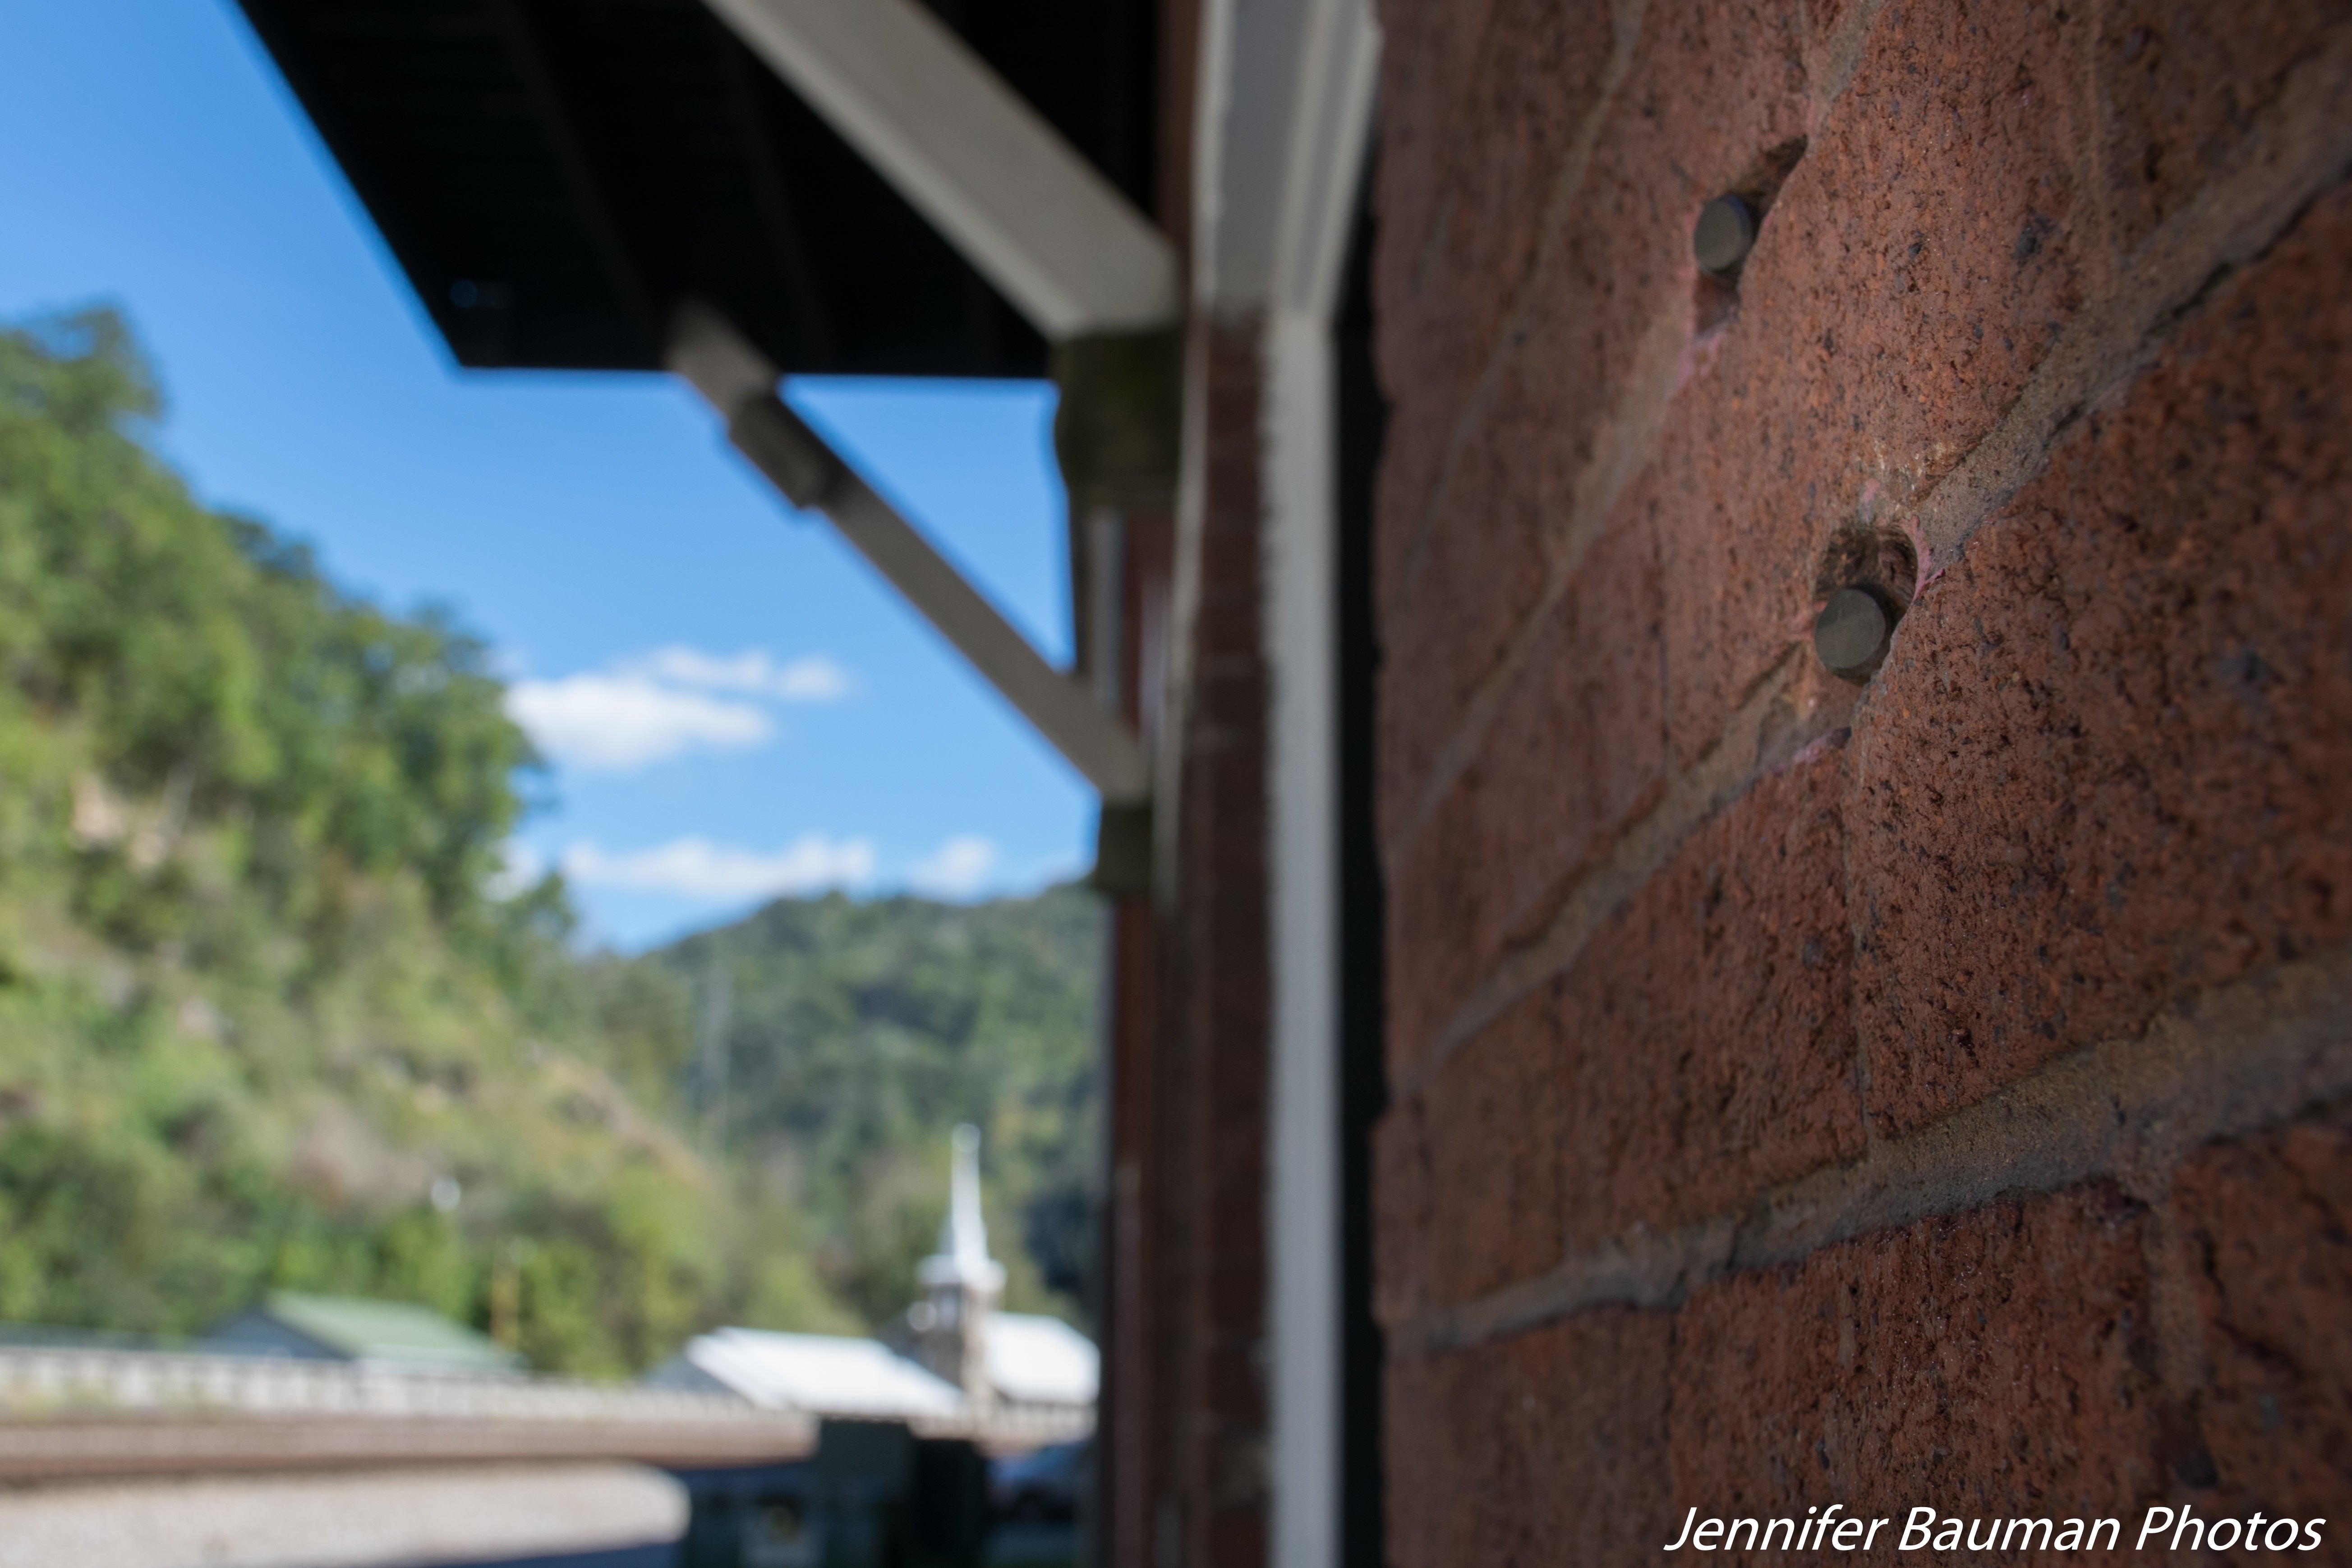 Bullet holes and slugs in the wall from the "Matewan Massacre" where armed miners had a shootout with mine owners' security thugs.